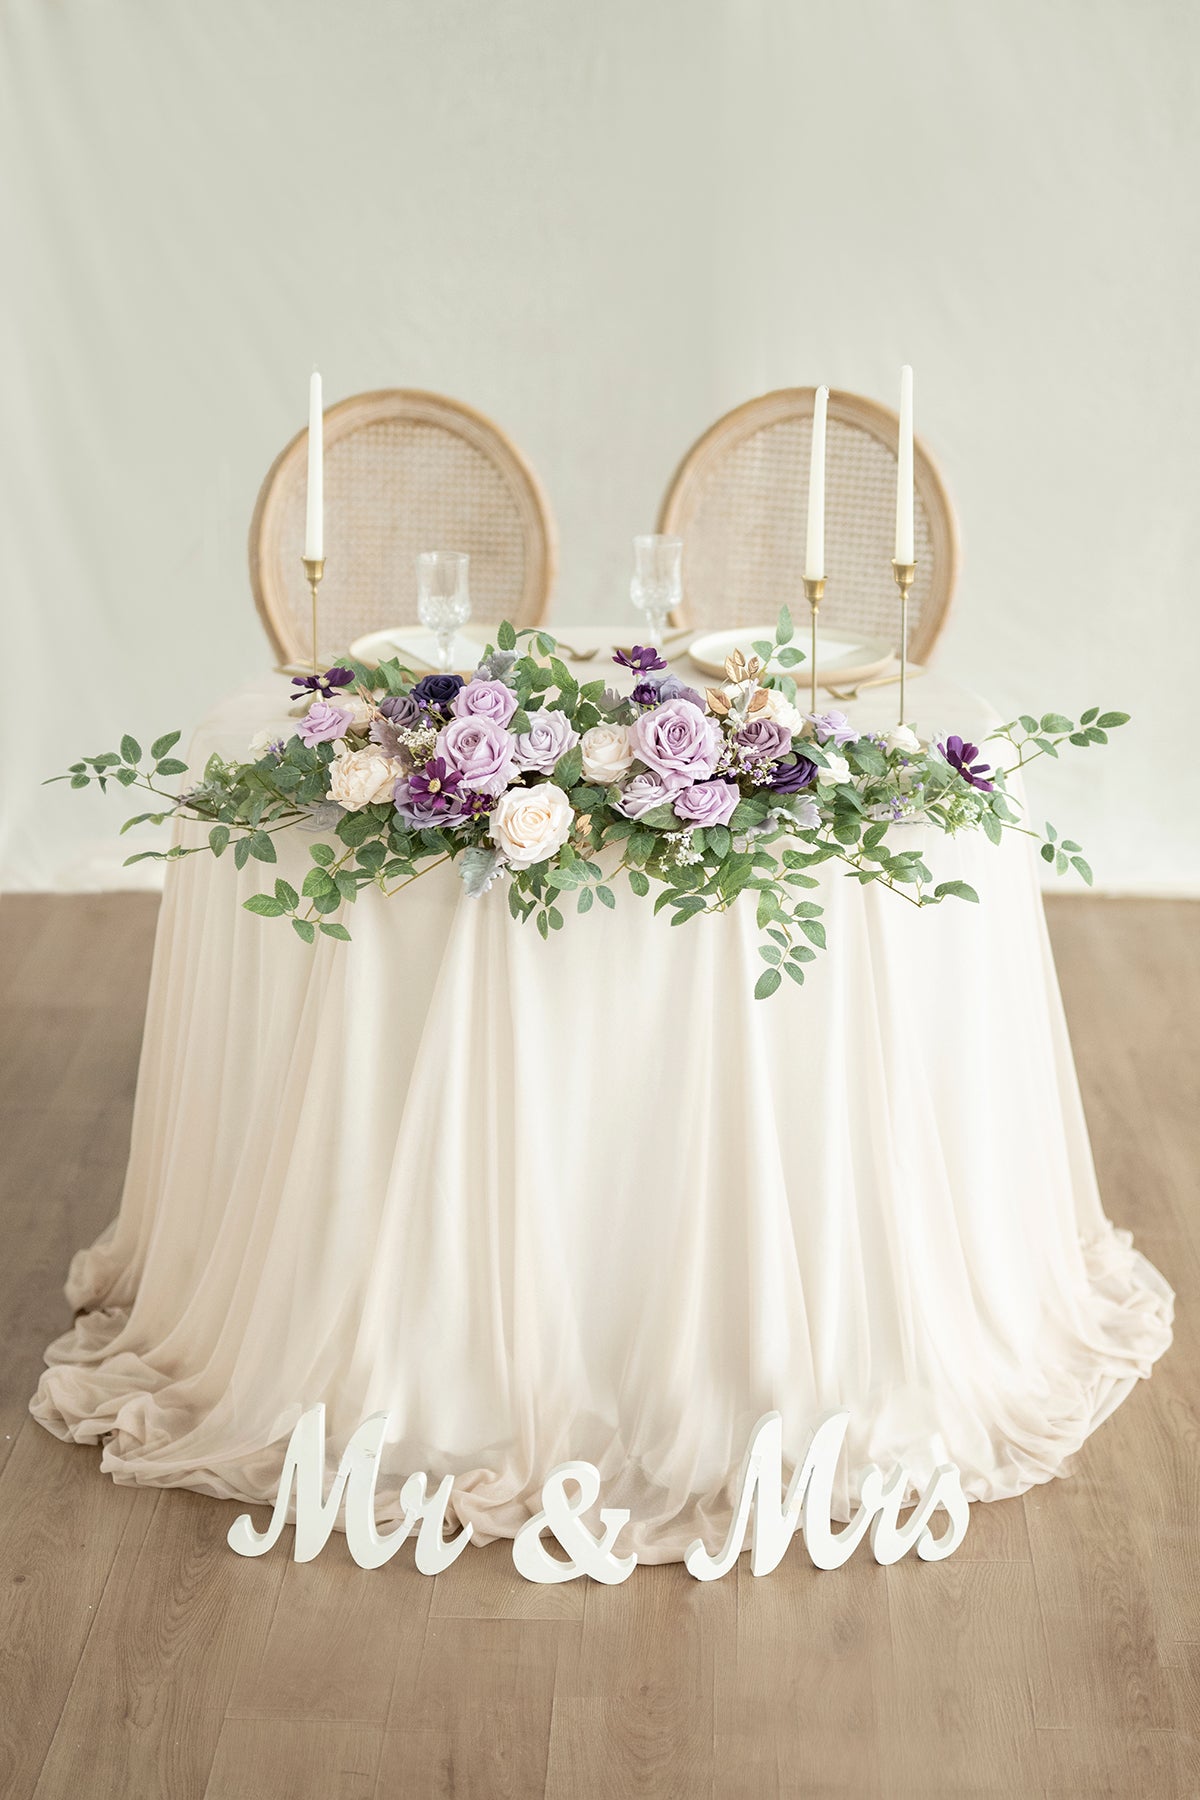 Head Table Floral Swags in Lilac & Gold